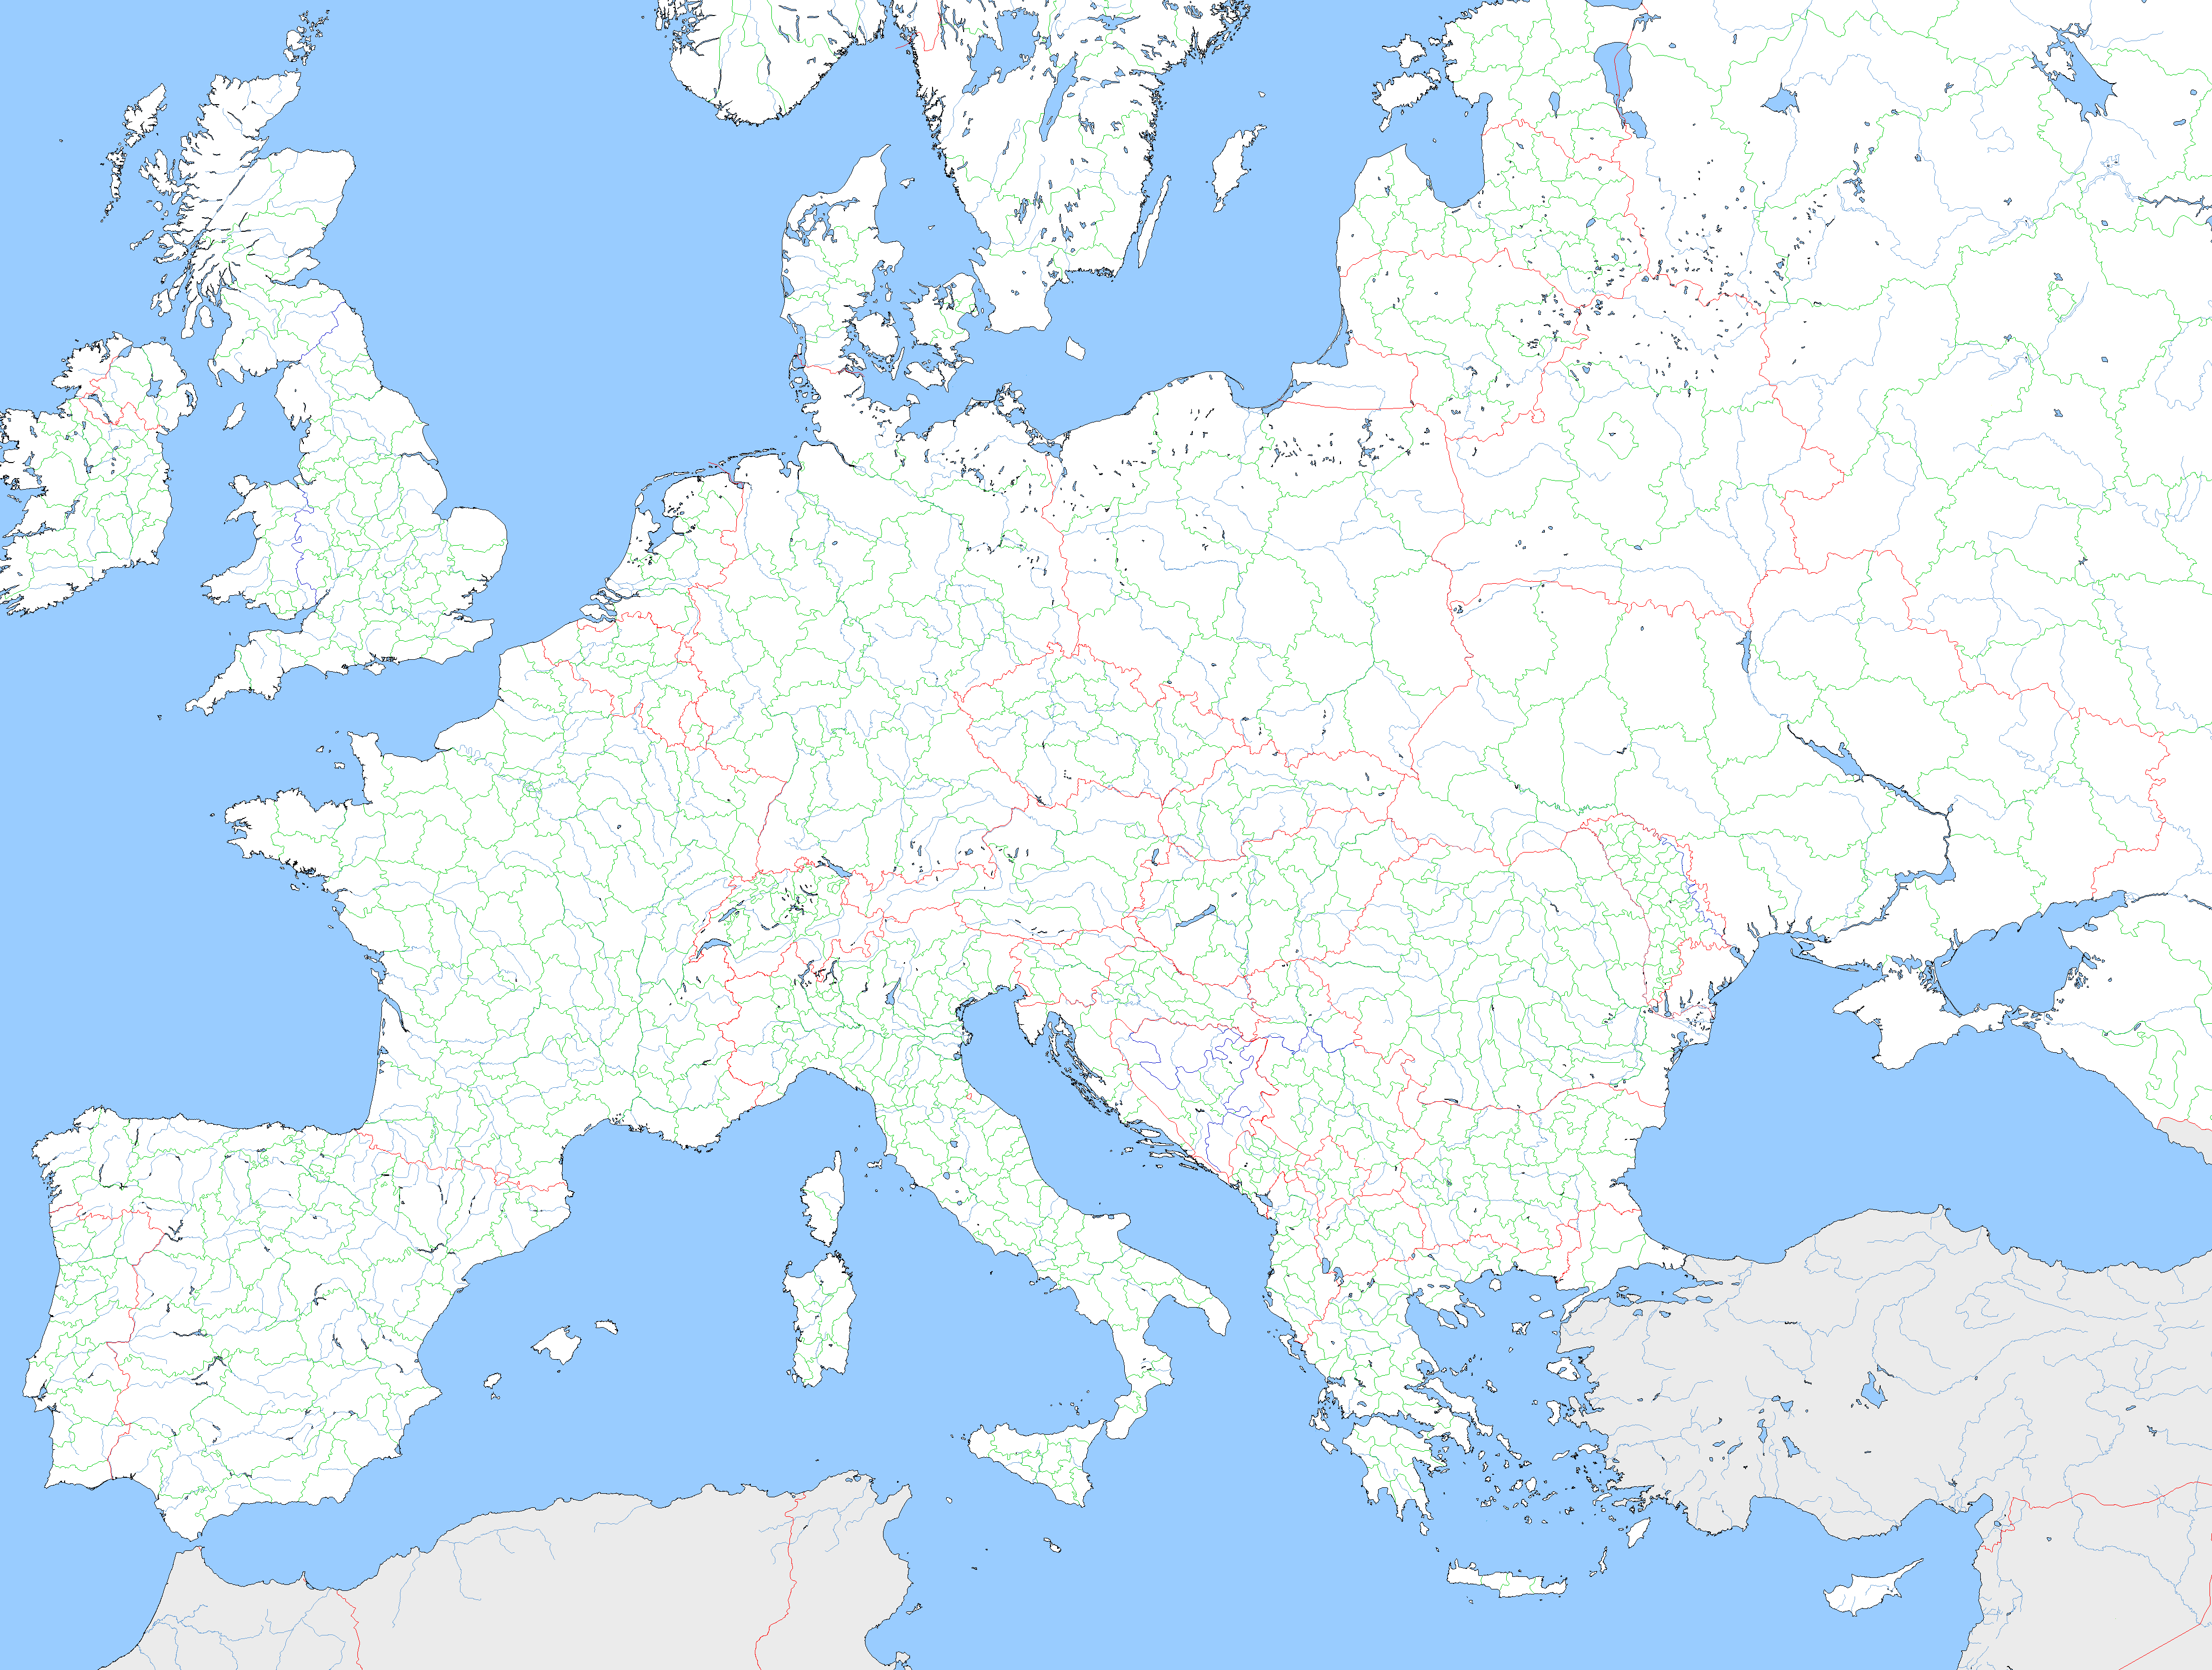 large-blank-europe-template-by-mdc01957-on-deviantart